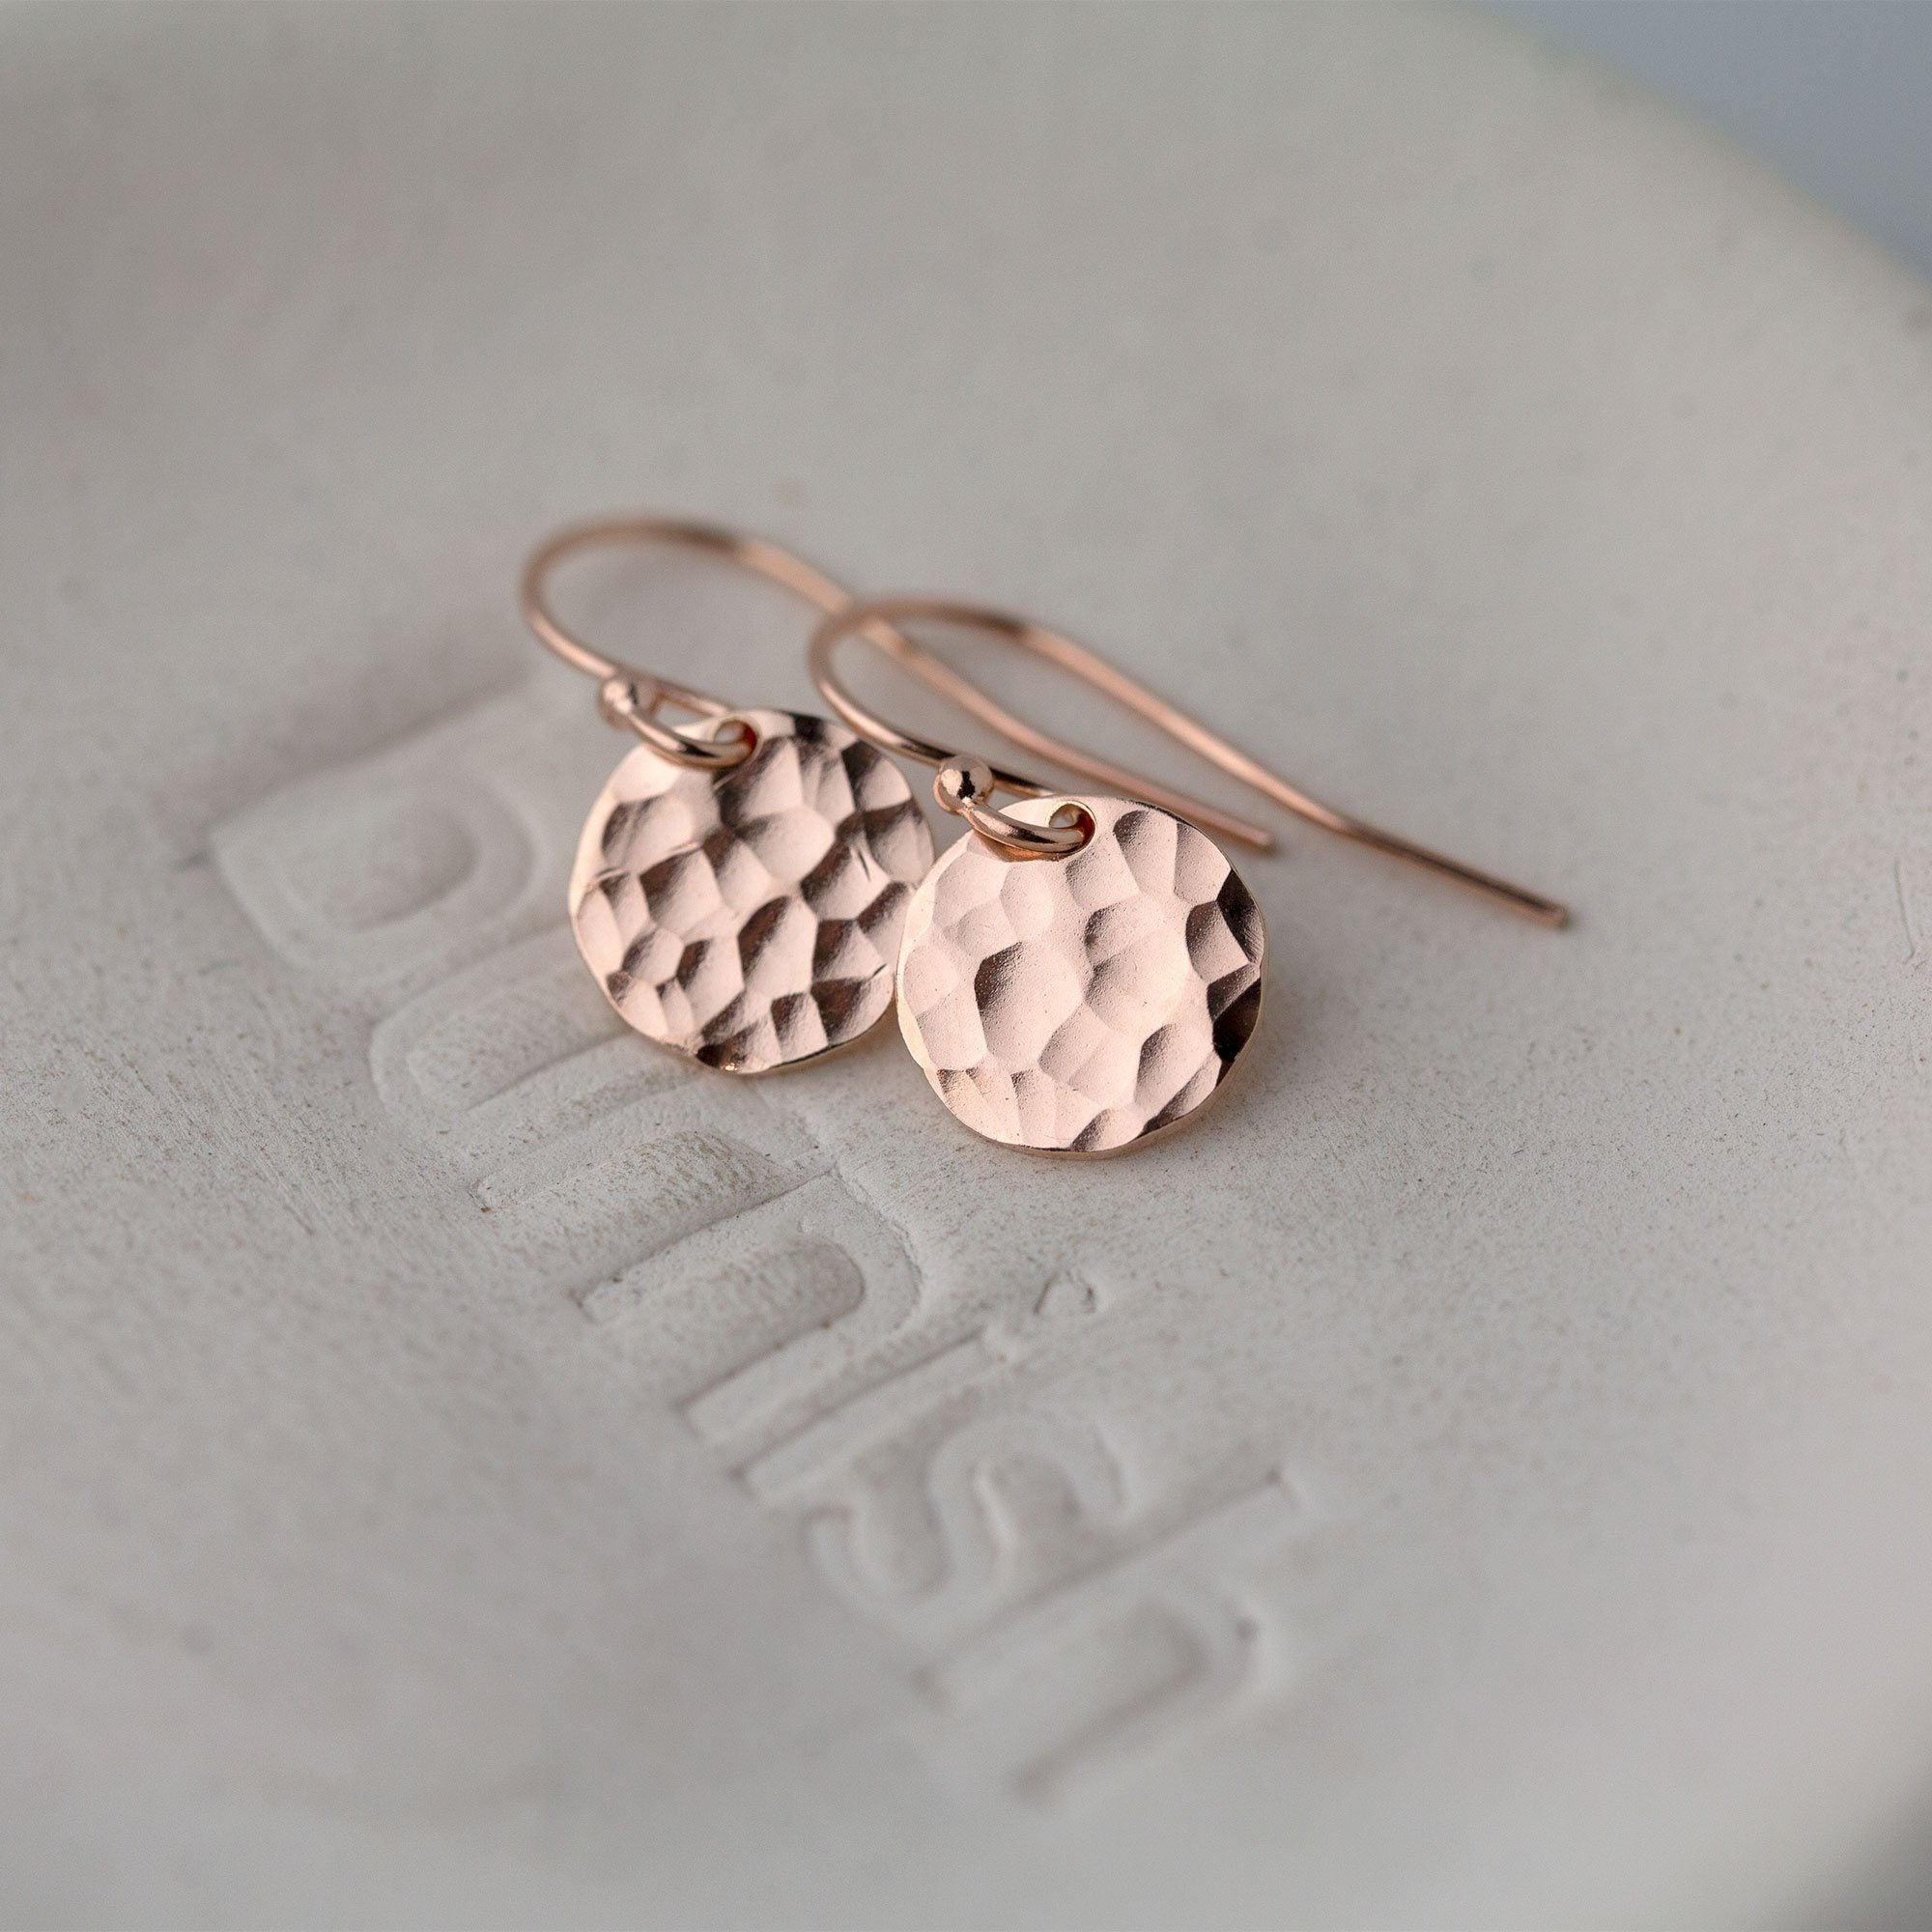 Hammered Disc Earrings - Rose Gold Fill - Handmade Jewelry by Burnish